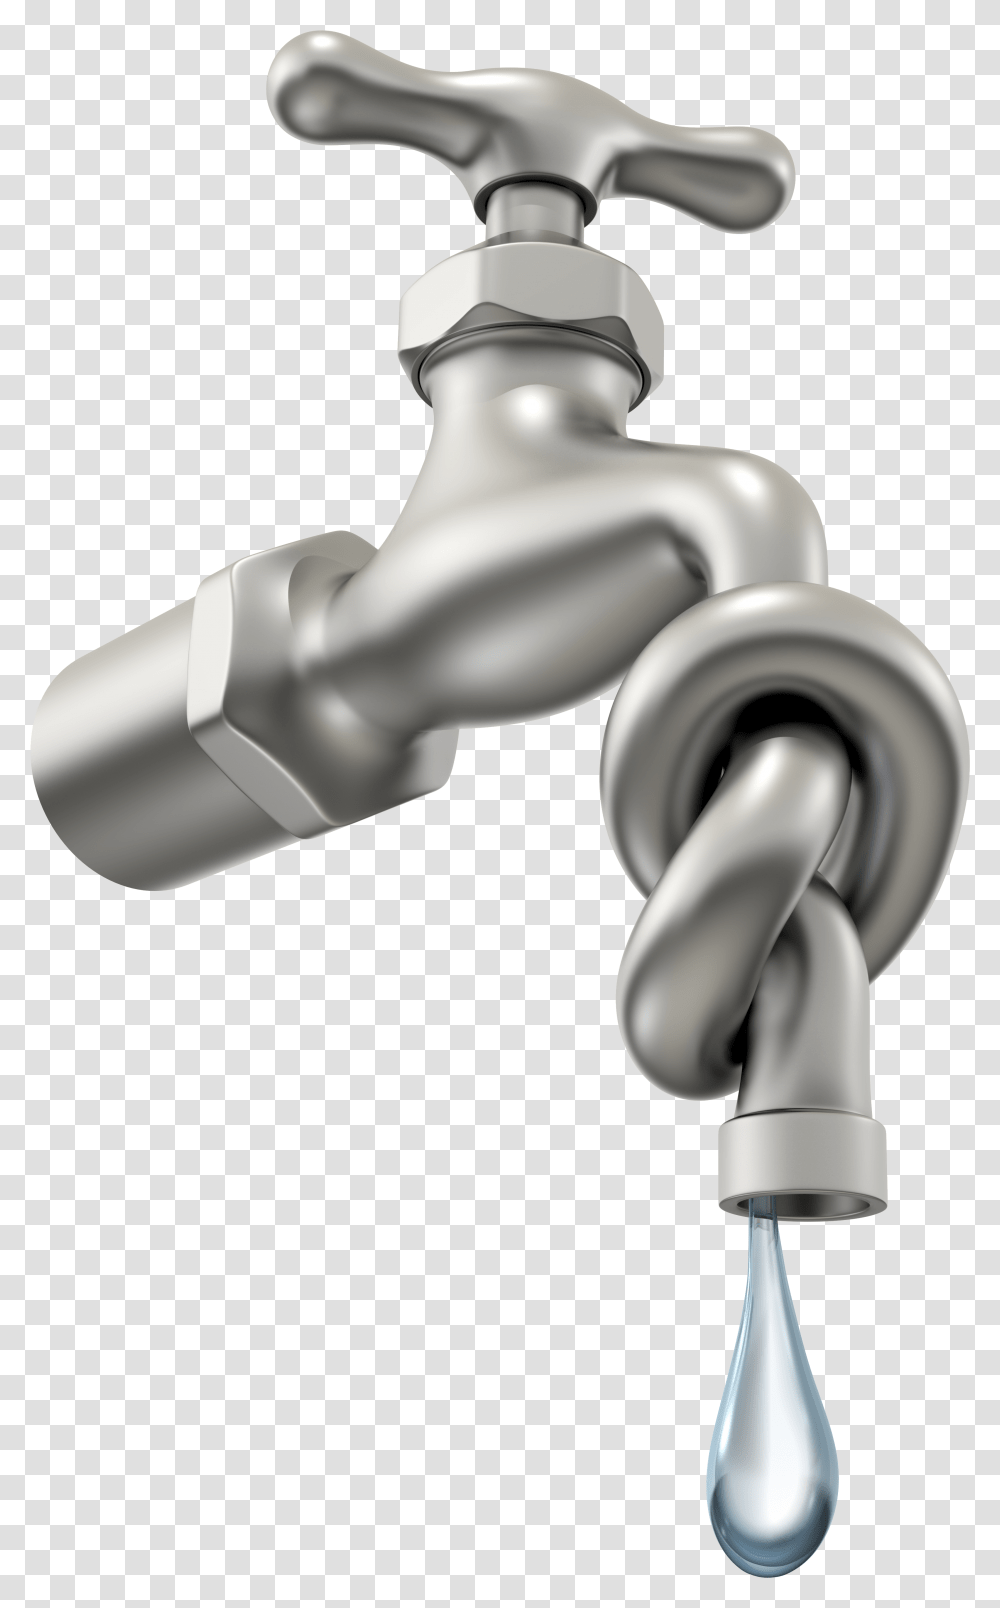 Twisted Faucet With Water Drip Trophy Club Municipal Semen Leakage Penis Transparent Png